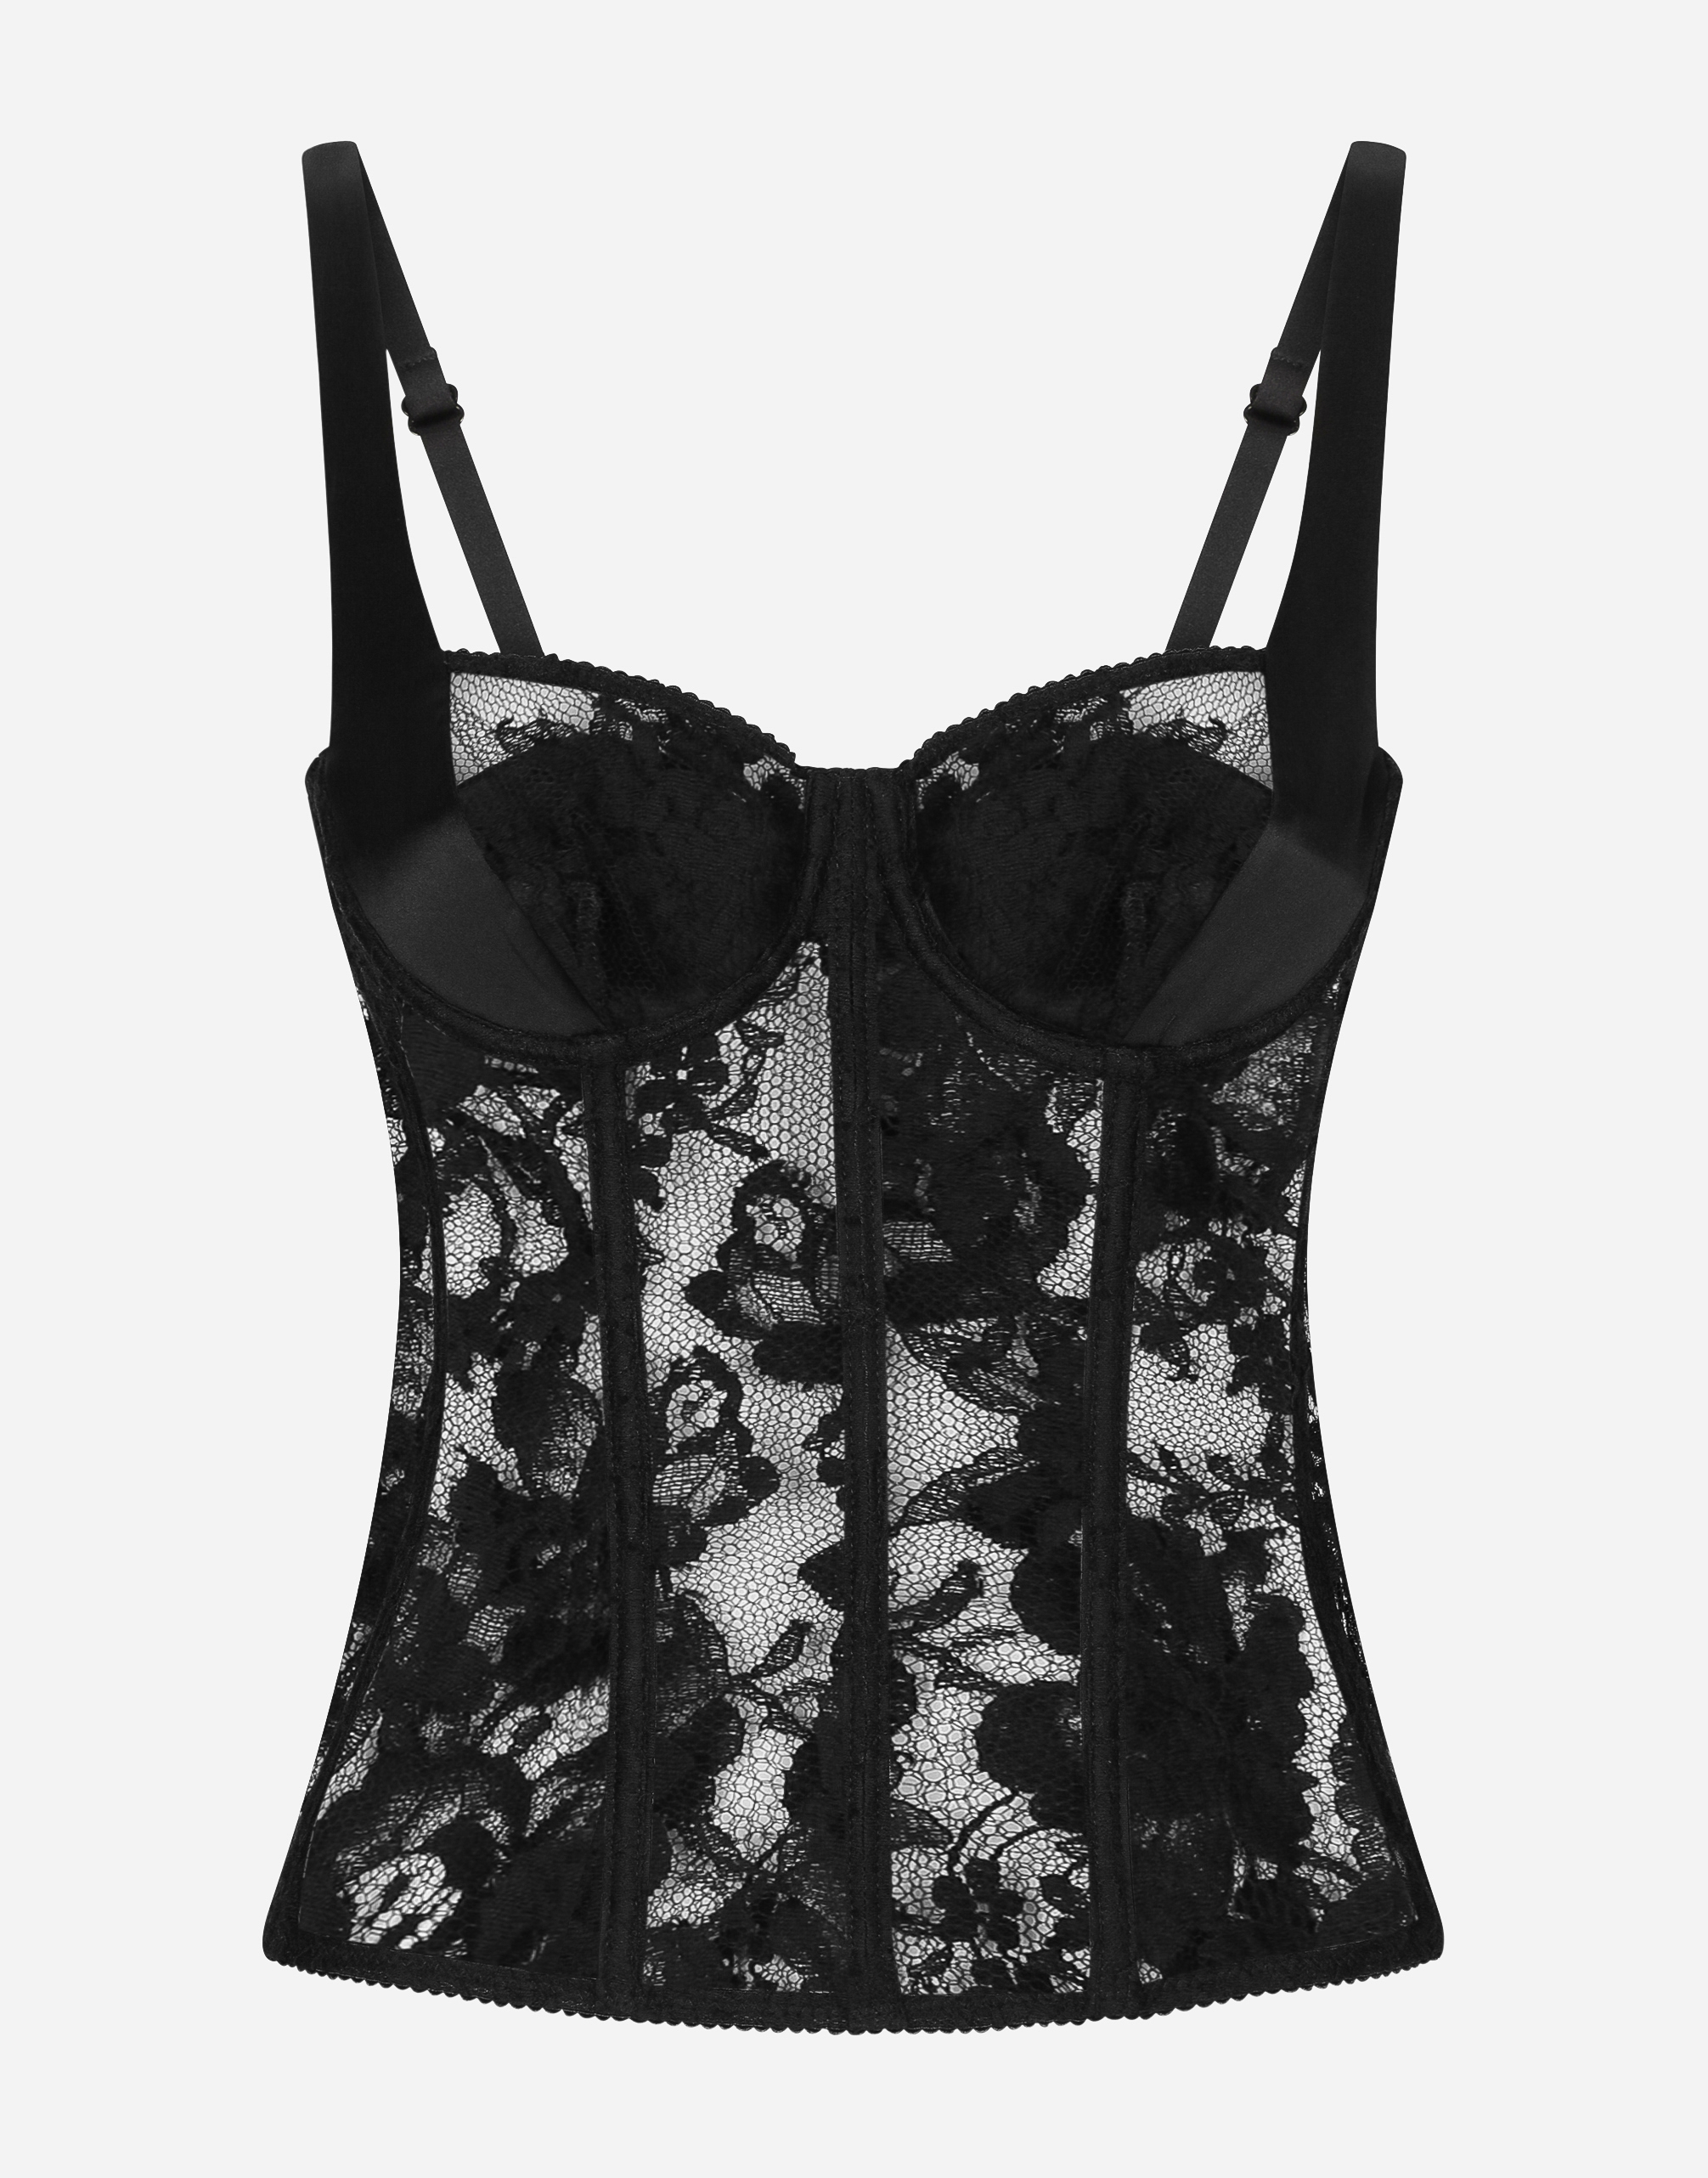 Lace lingerie bustier with straps in Black